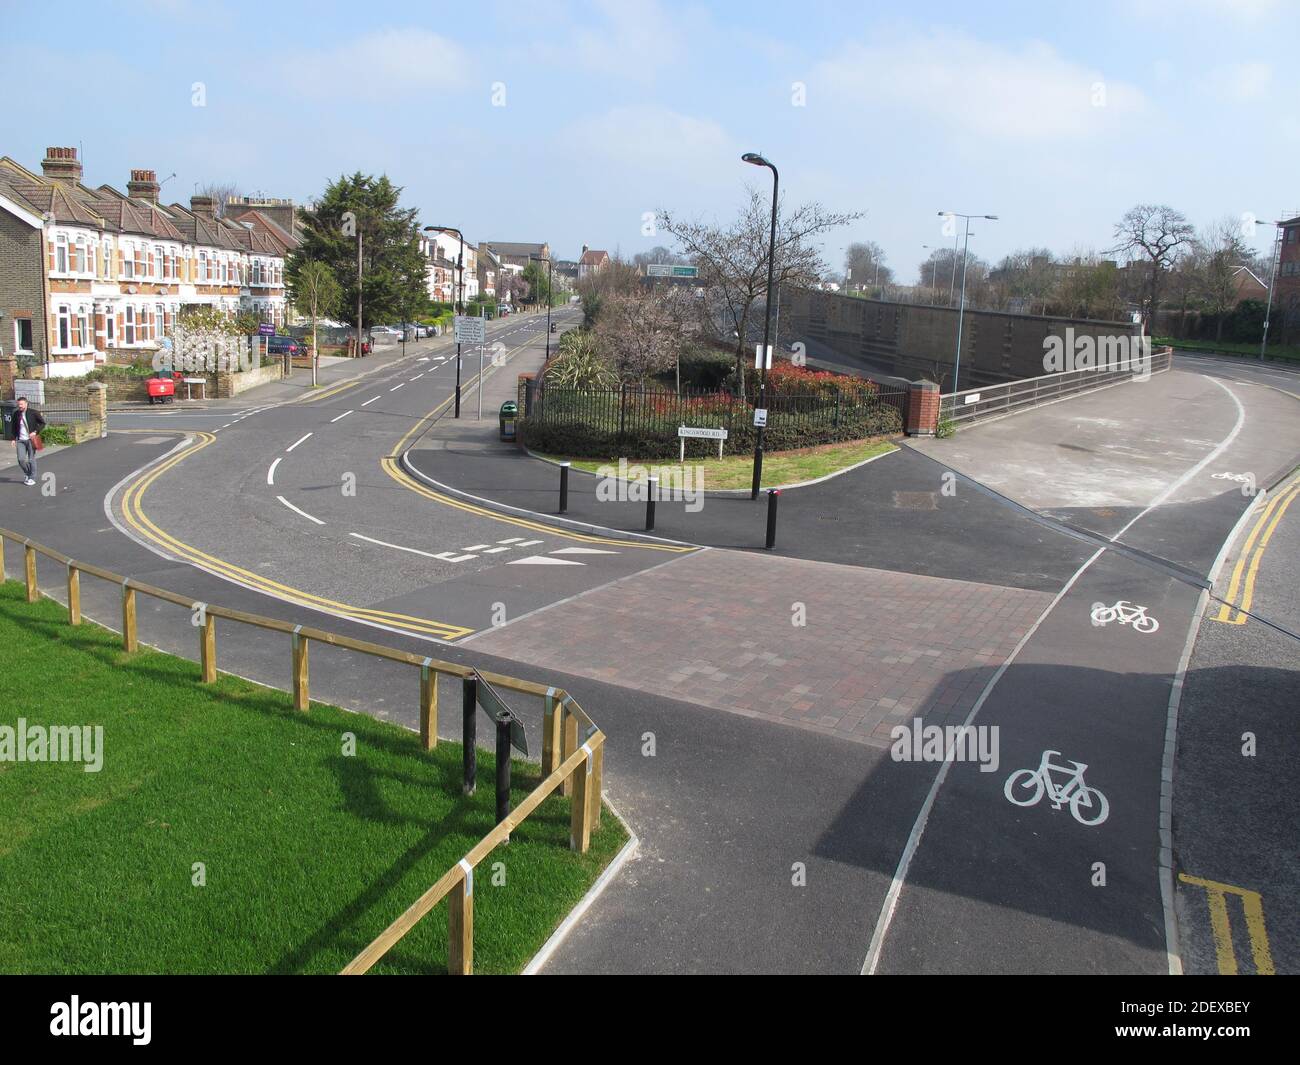 Remodelled road junction in Leytonstone, London. Part of Waltham Forest's 'Mini-Holland' safer streets initiative. Shows new cycle lane. Stock Photo